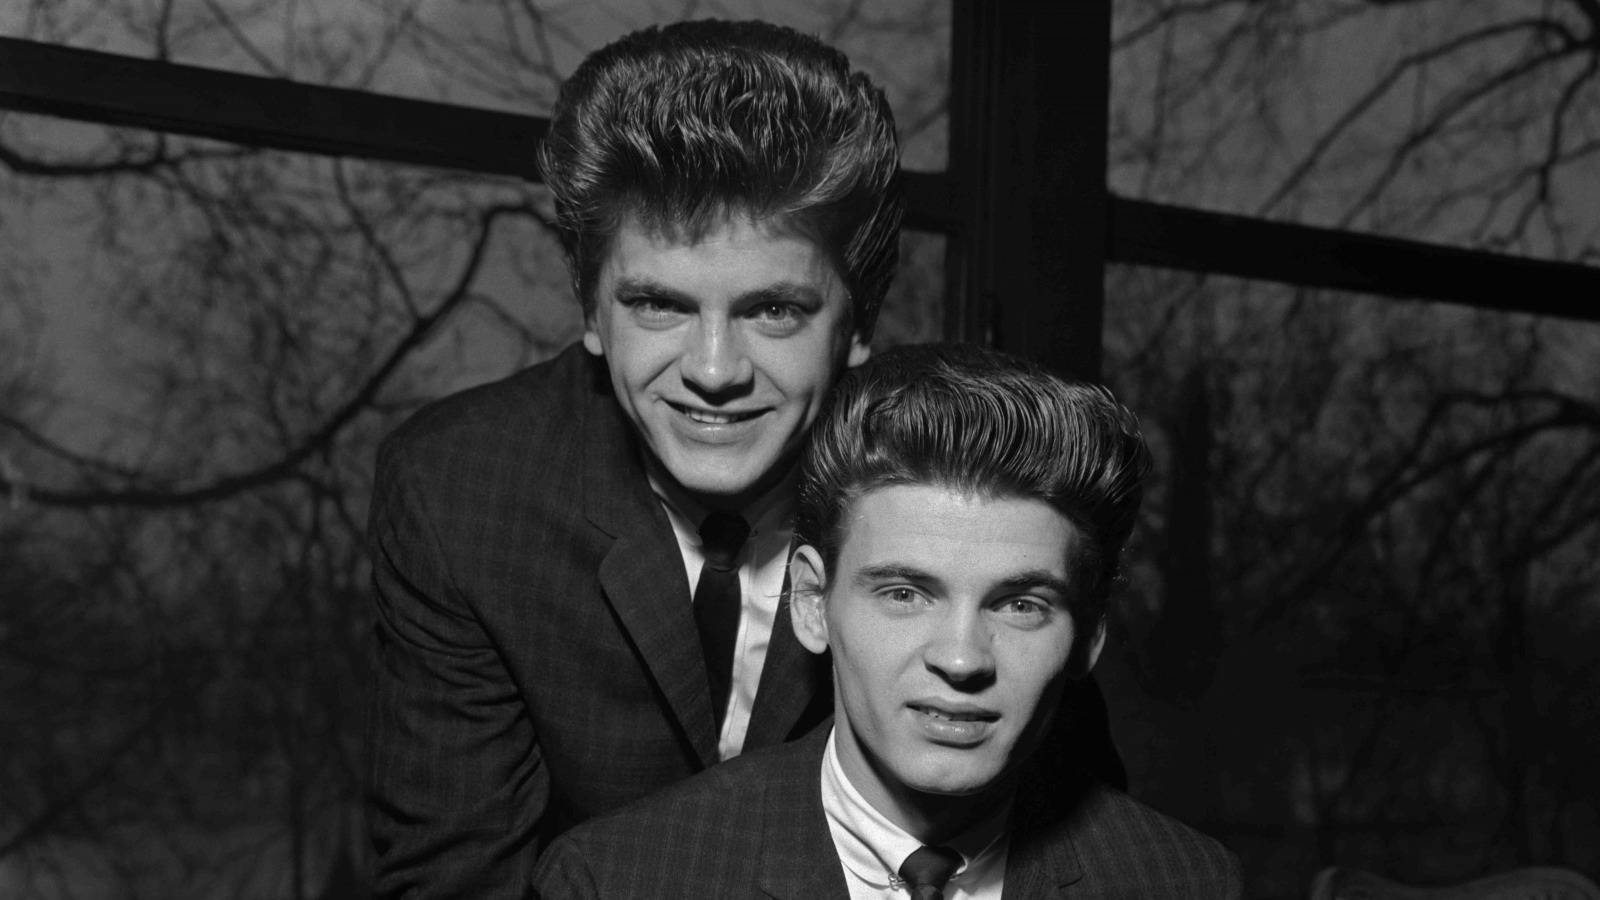 Rockduo Everly Brothers Monochrome-fotoshooting Wallpaper